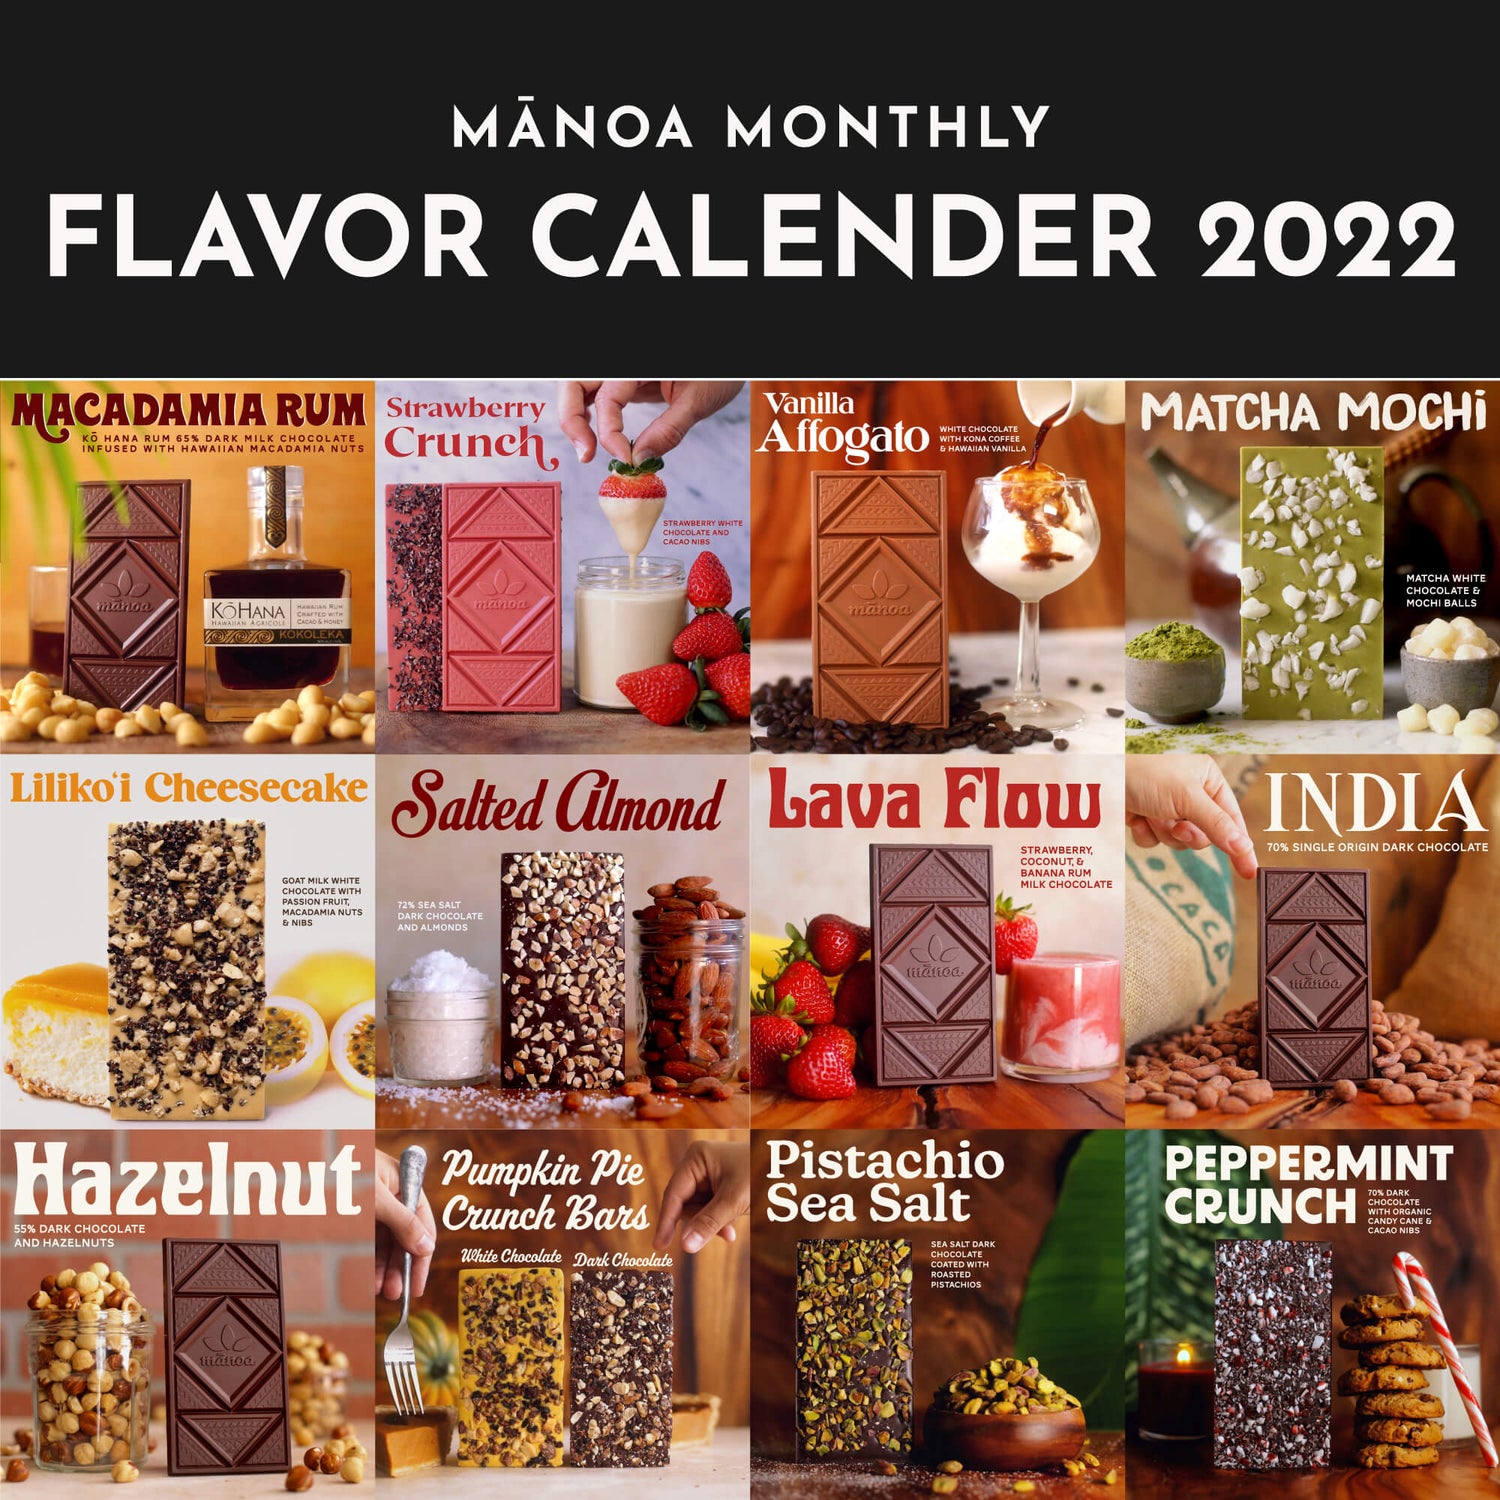 12 different flavors of Manoa monthly chocolate